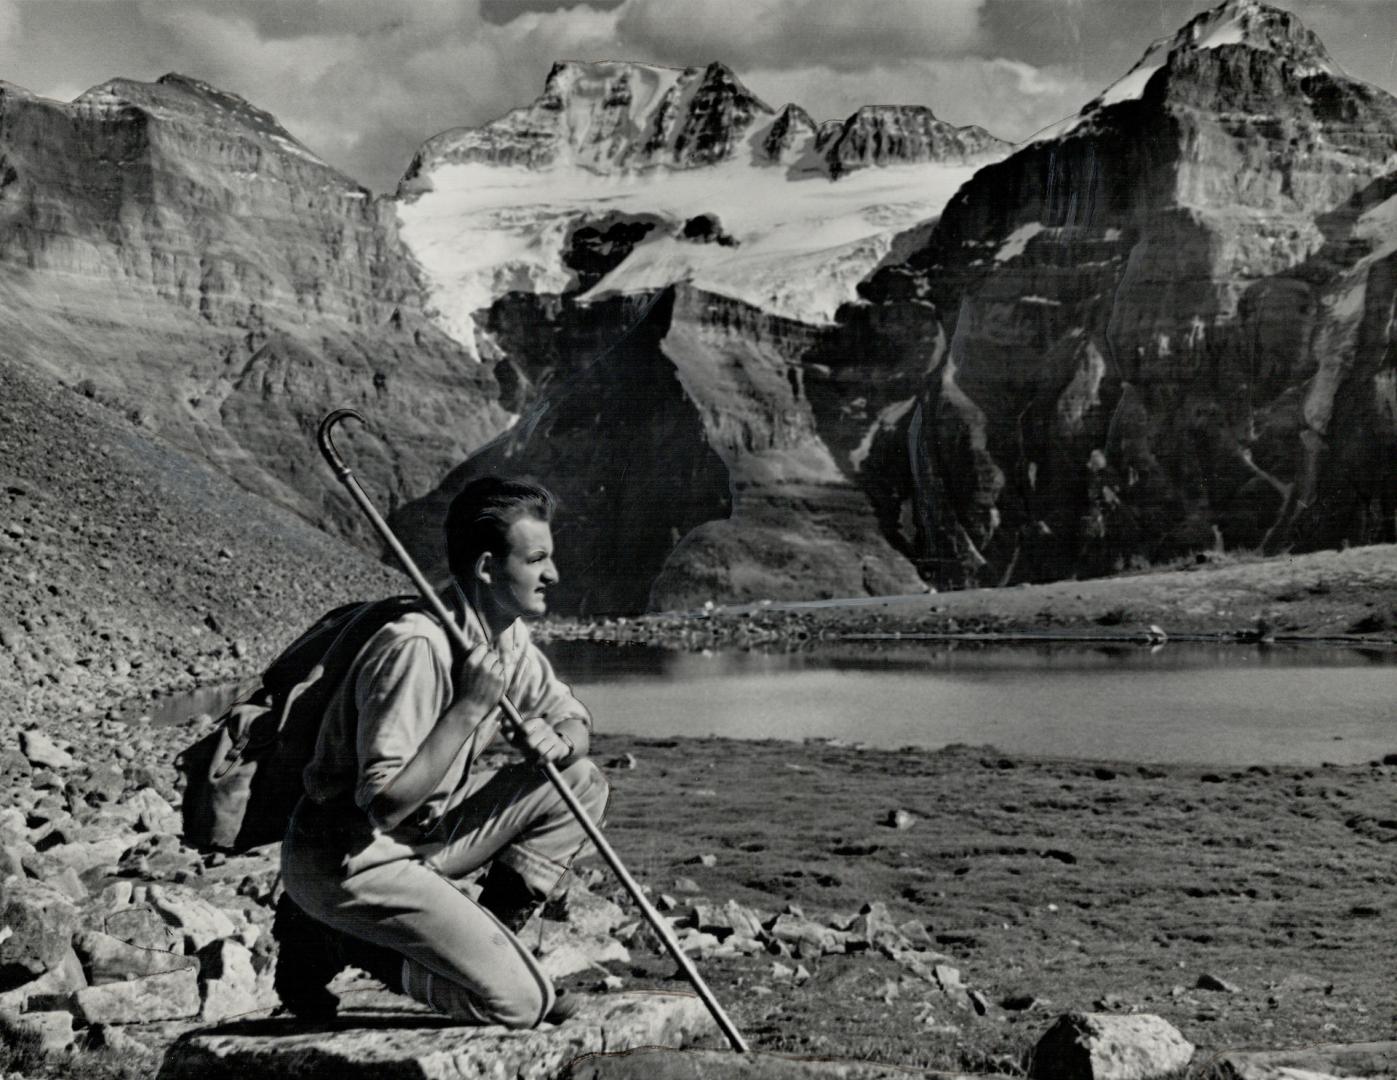 Cameraman Nicholas Morant missed the greatest action photograph of his life when he didn't snap his fight with a grizzly bear. Here he is shown at Larch Valley, near Lake Louise